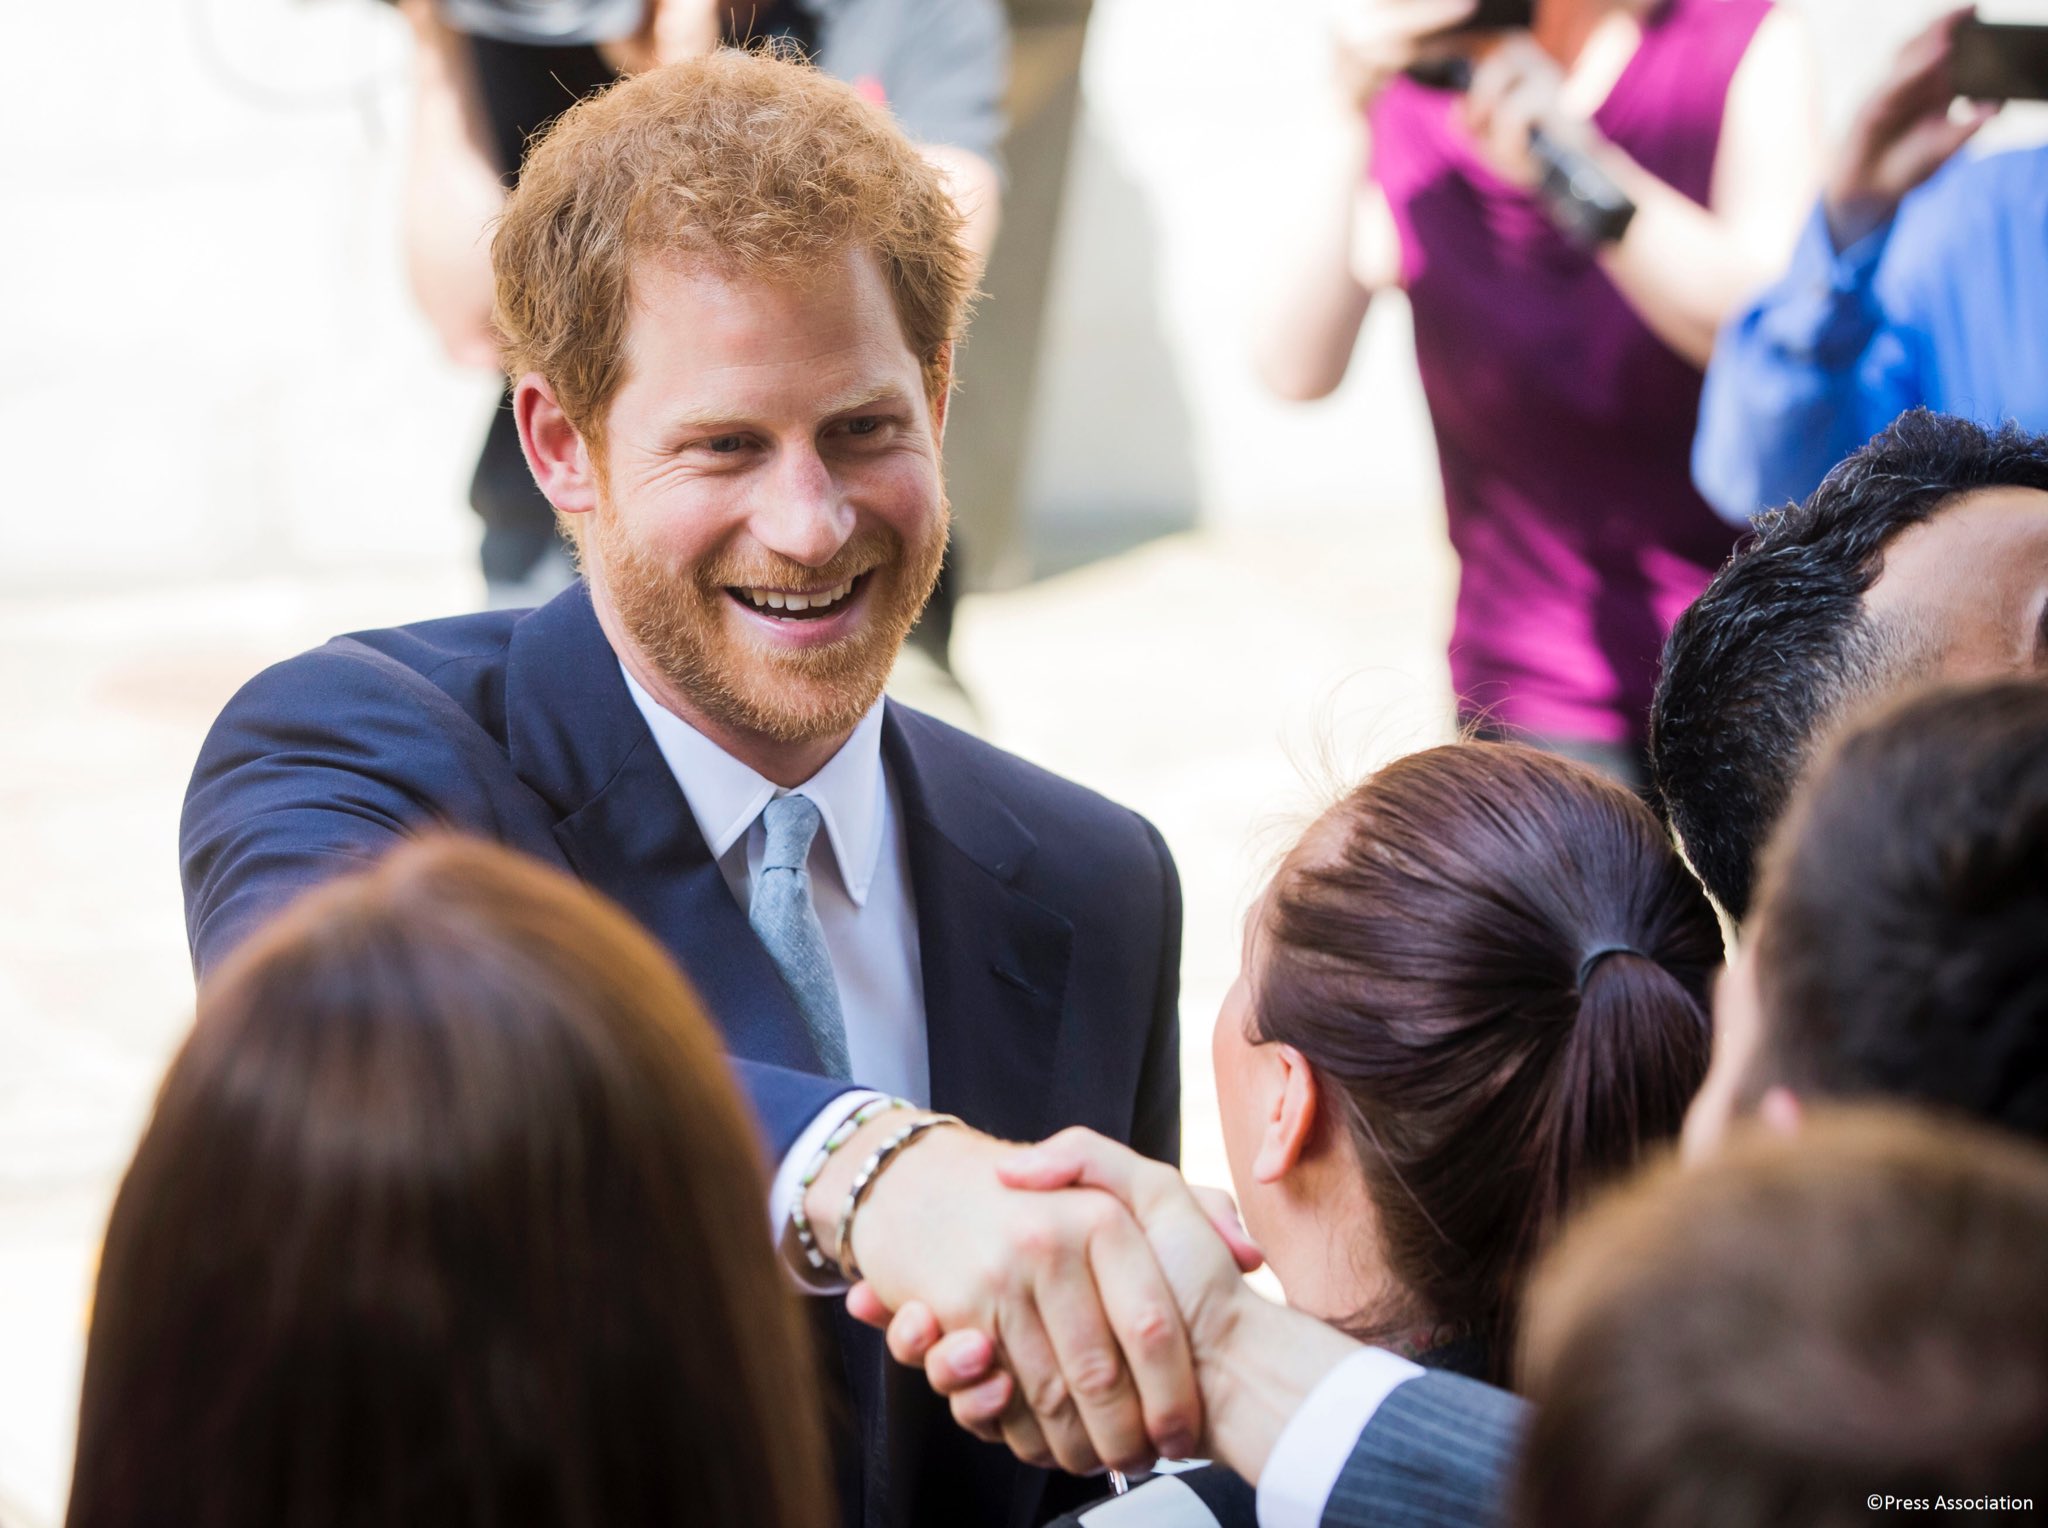 Thank you for all of the kind messages wishing Prince Harry a happy birthday! 